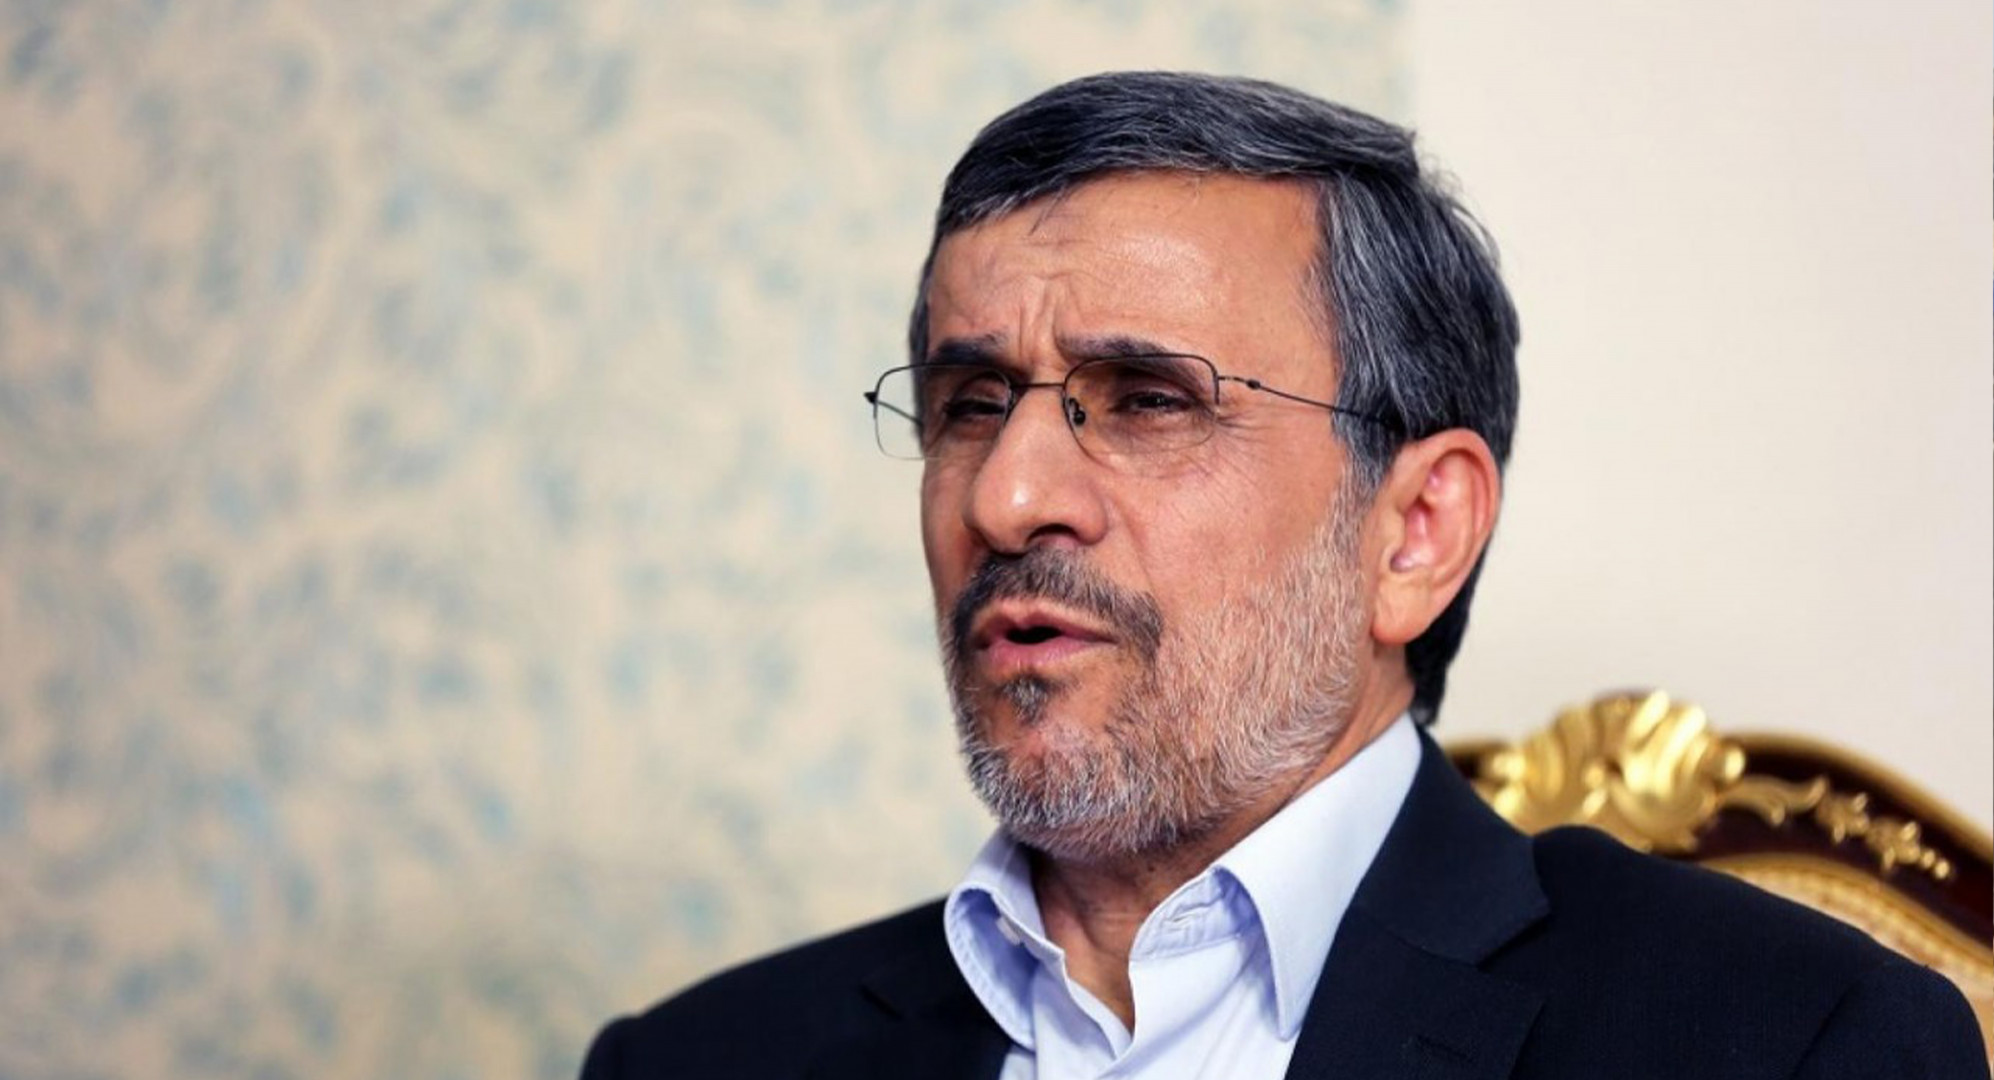 Former Iranian president calls his country's intelligence to put more effort into protecting state institutes instead of watching his house